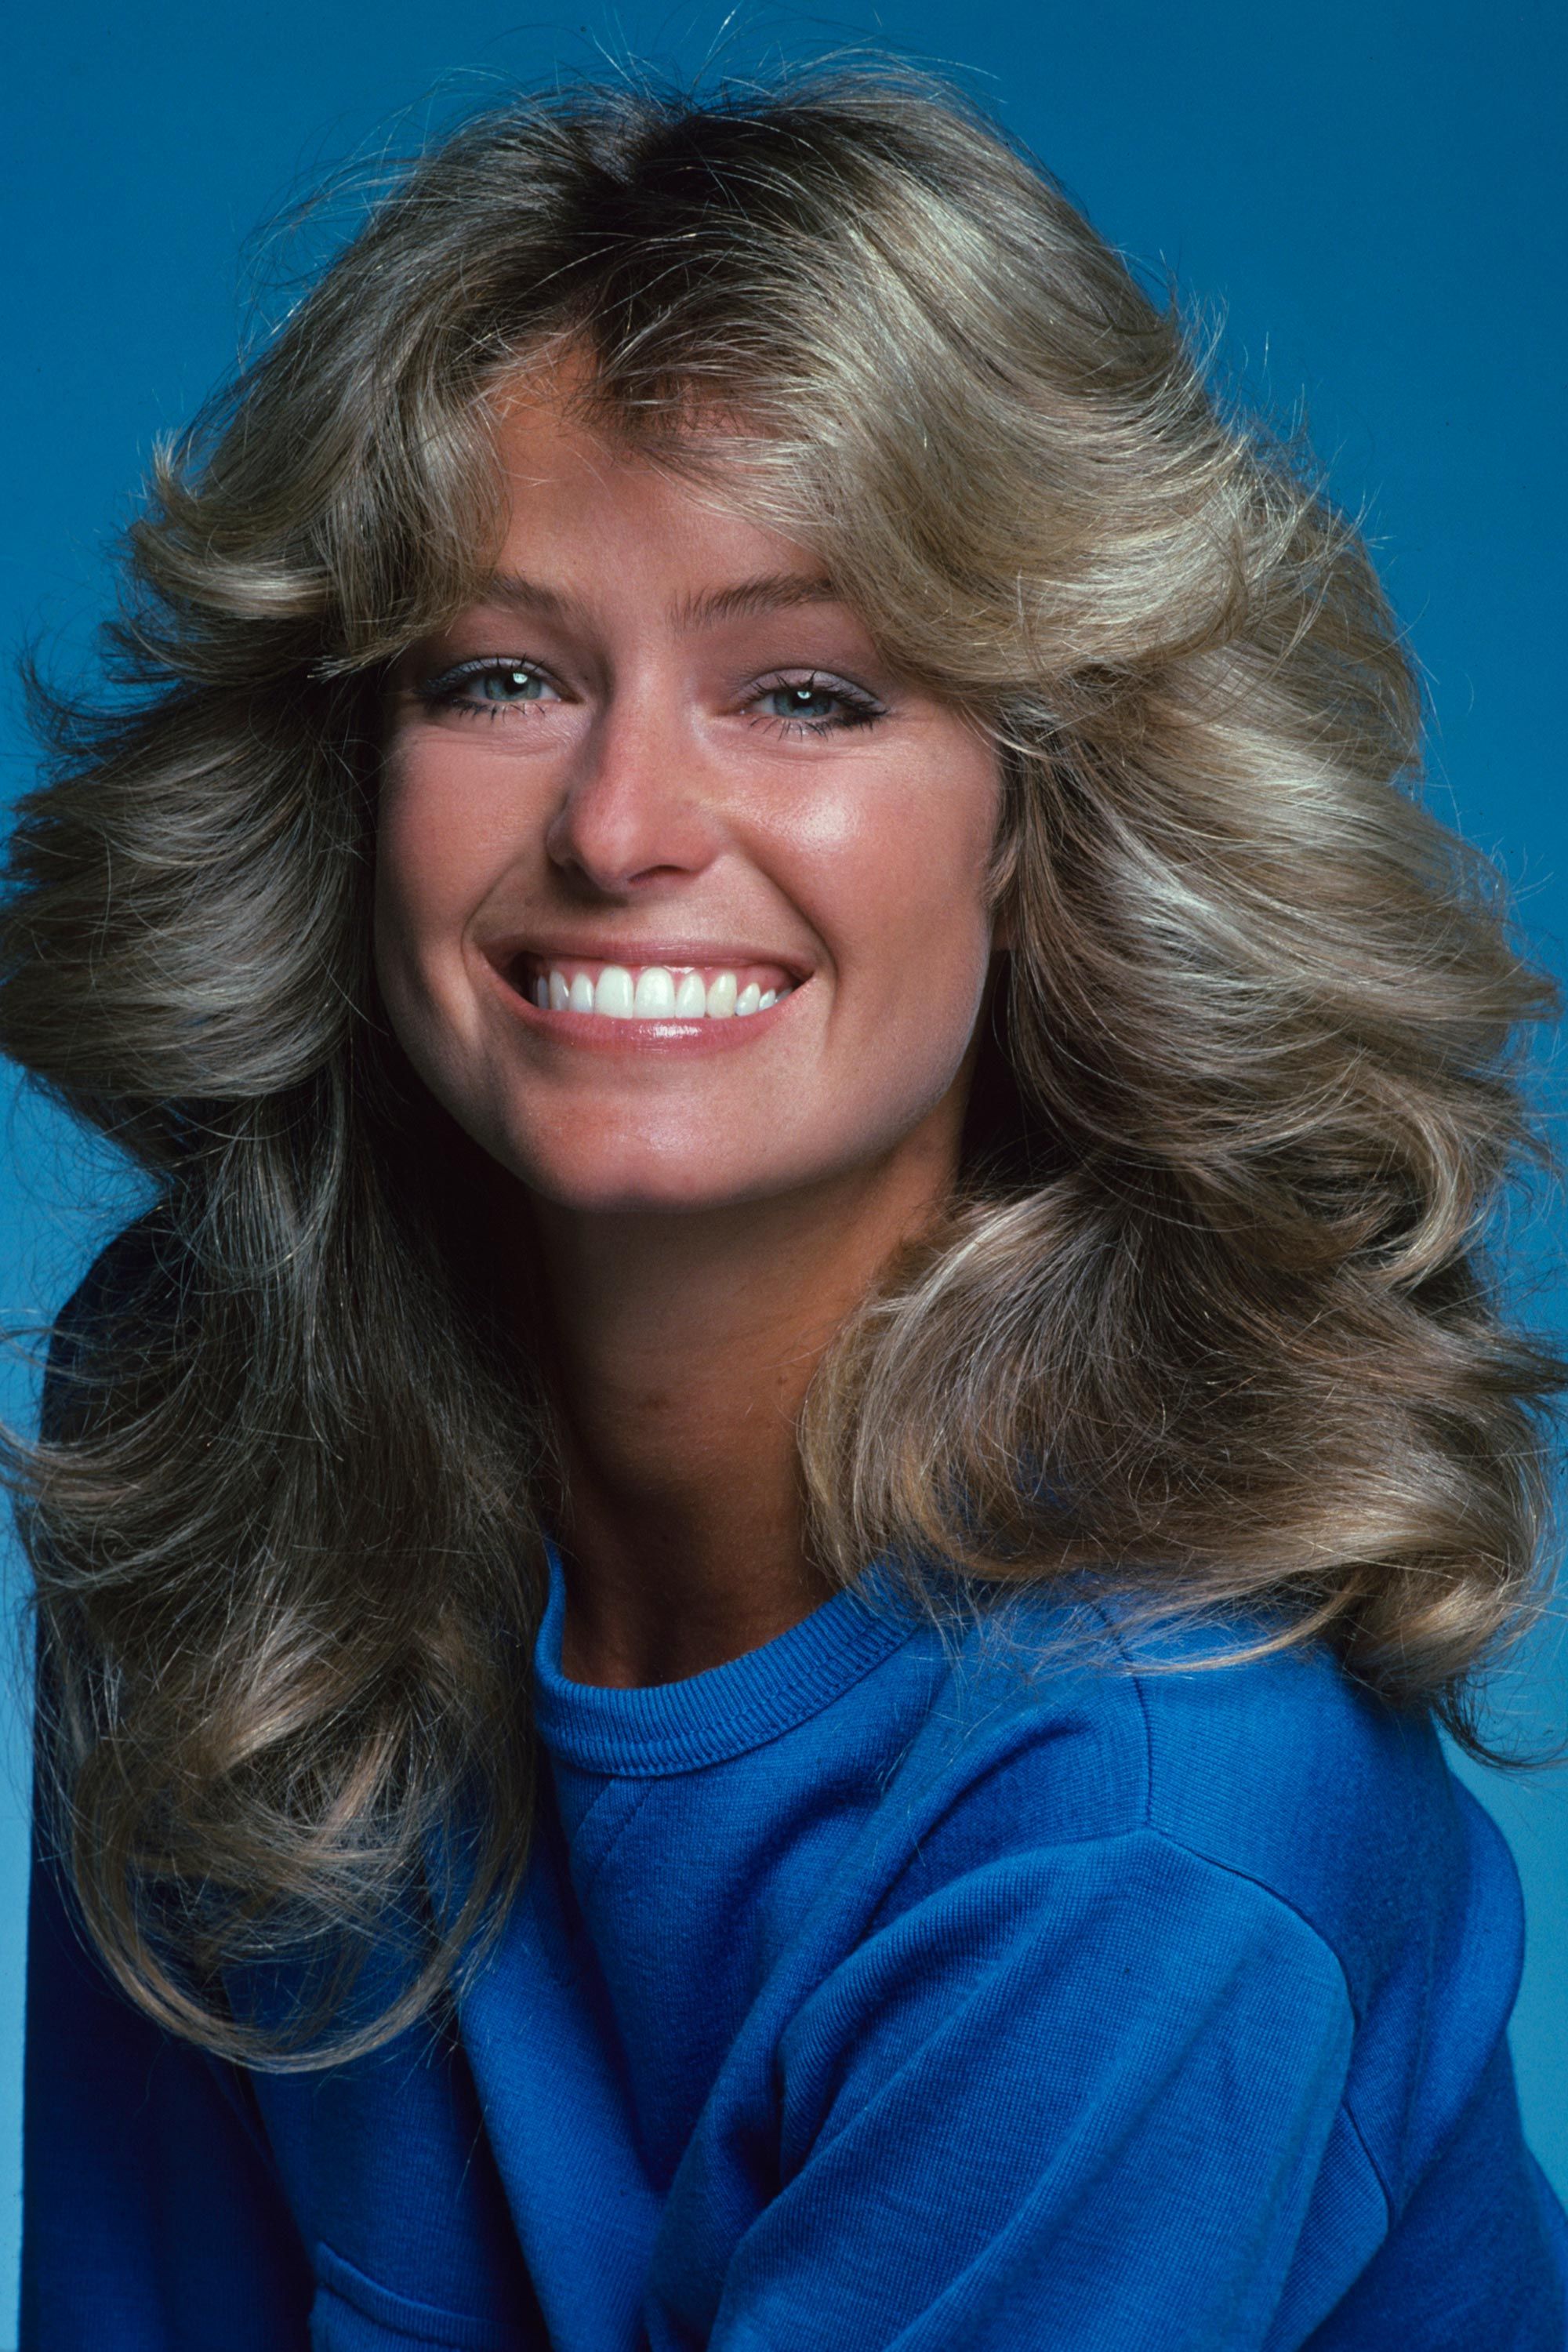 Celebrity Hairstyles From the '80s You Completely Forgot About